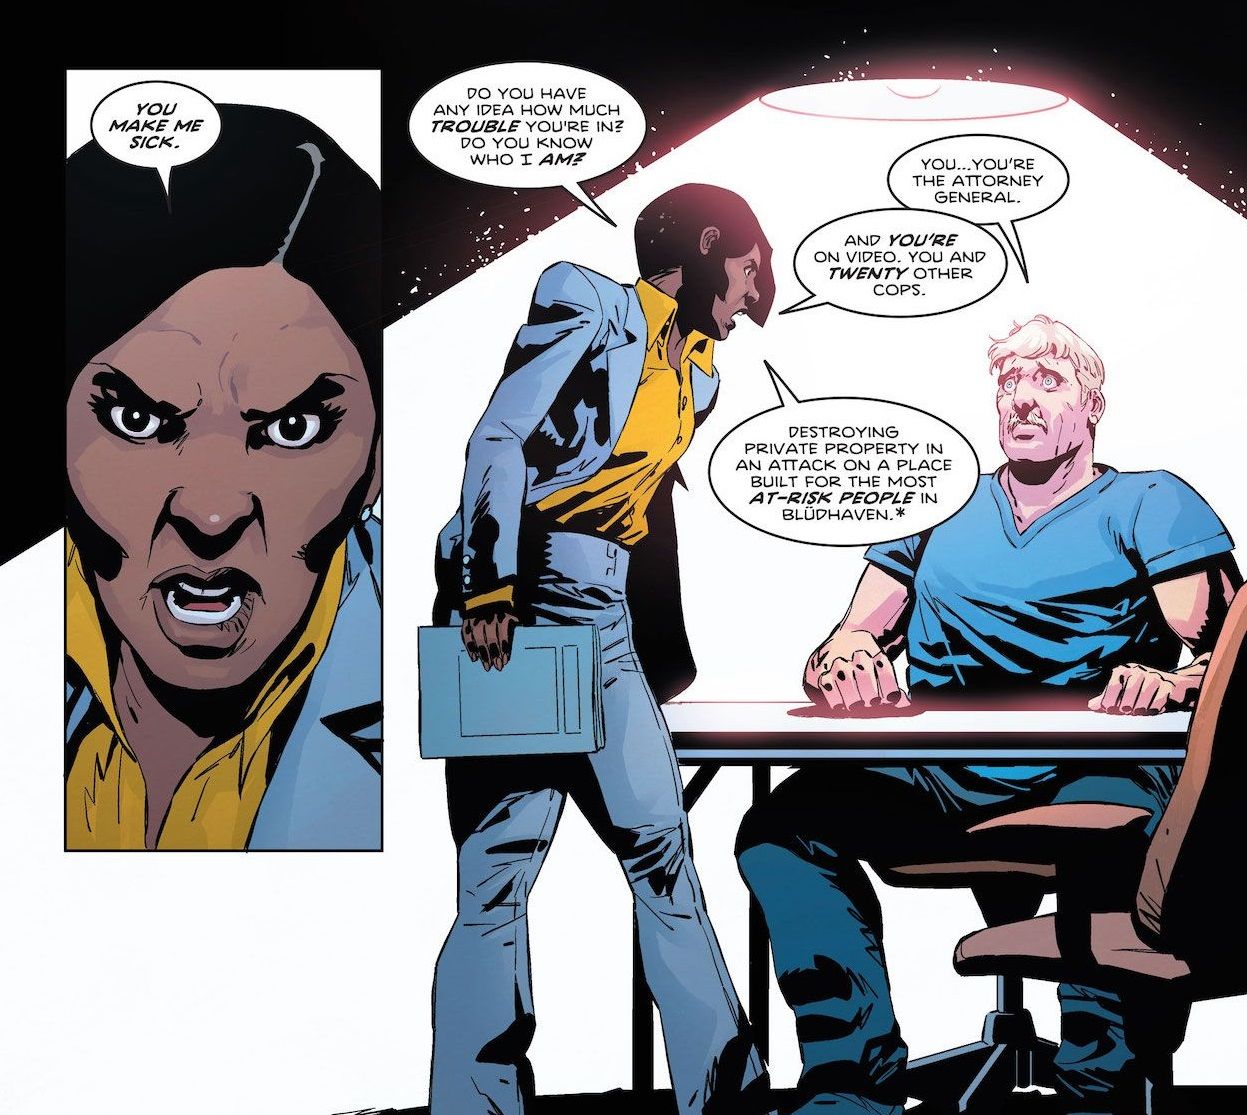 The attorney general interrogating the cop in Nightwing #94